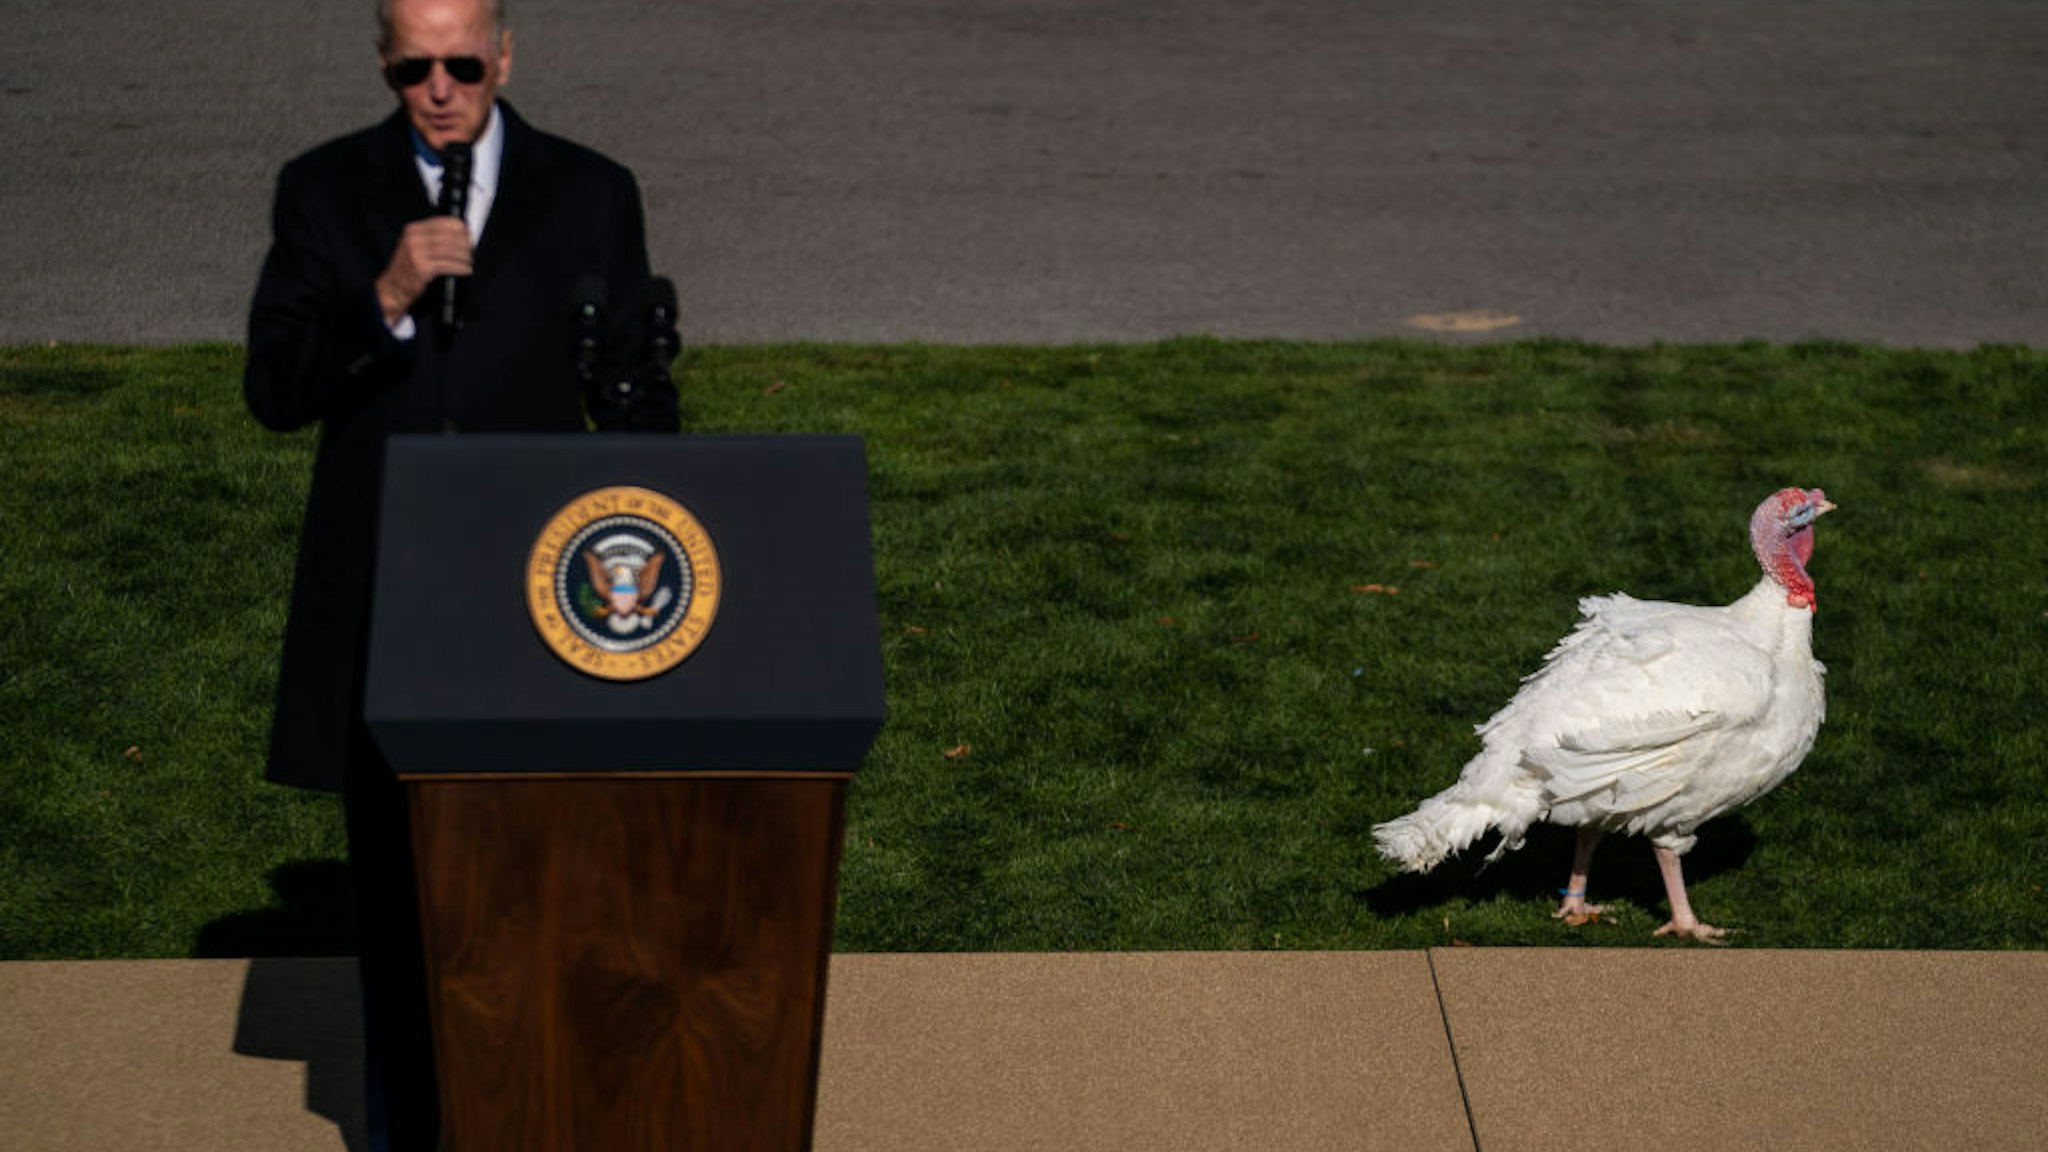 WASHINGTON, DC - NOVEMBER 21: Chip, one of the National Thanksgivng Turkeys walks behind President Joe Biden as the president speaks during the pardoning of the National Thanksgiving Turkeys on the South Lawn of the White House on Monday, Nov. 21, 2022 in Washington, DC. Chocolate and Chip were raised at Circle S. Ranch, outside of Charlotte, North Carolina, and will reside on the campus of North Carolina State University following today's ceremony.